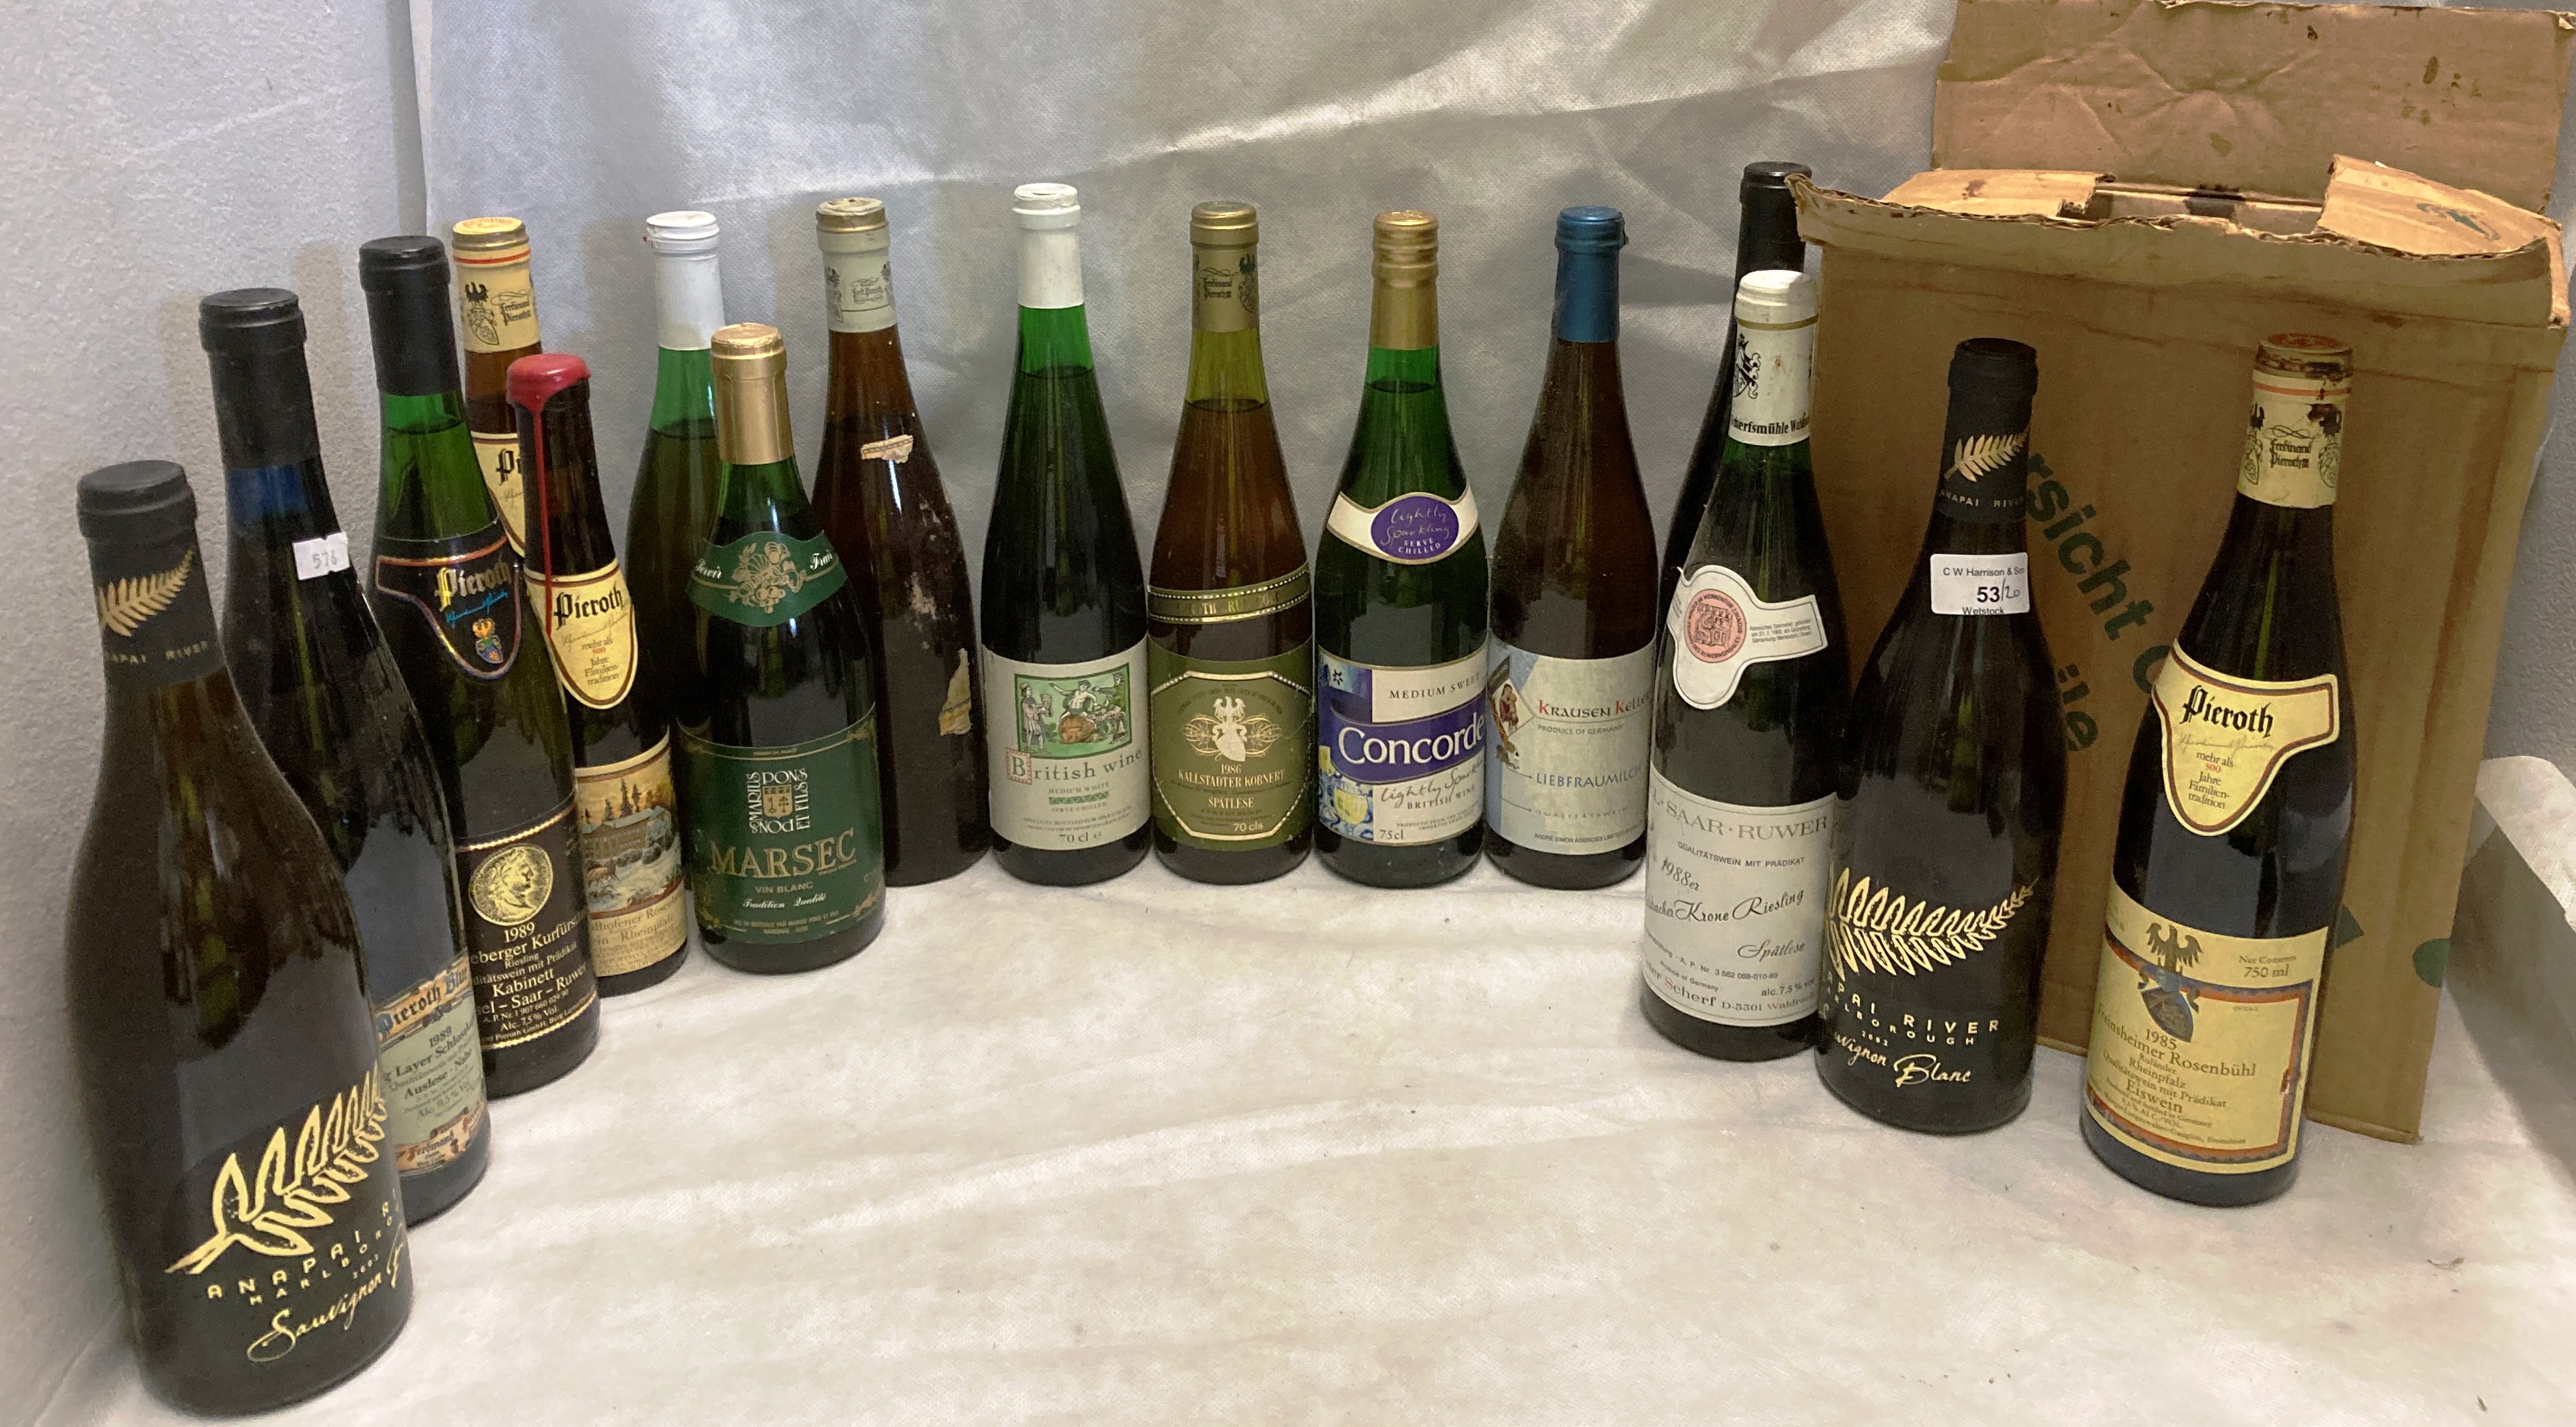 Twenty various bottles of mainly white wine - Pieroth, Concorde, Anapai River,